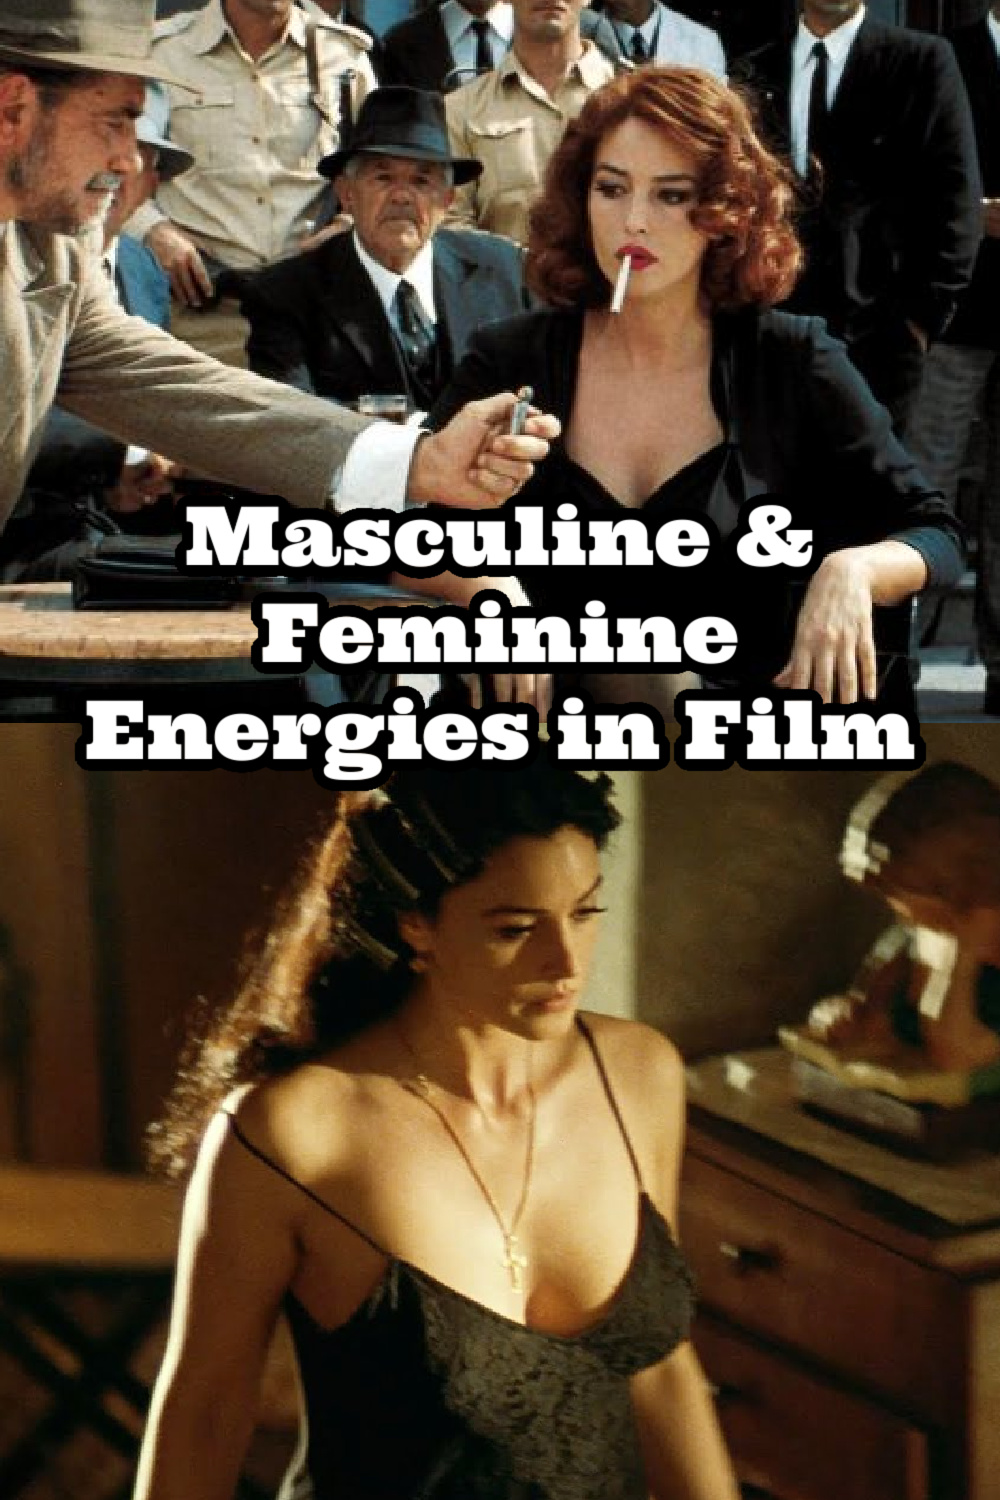 malena film analysis, feminine energy and safety, looking at women vs leaking sexual energy, masculine shield as a woman, why women compete with each other, why women hate on other women, lack of masculine role models, the dangerous effects of porn, wounded masculine vs healthy masculine, sexually disciplined men, healthy masculinity vs toxic masculinity, masculine and feminine energy, masculine and feminine energy in relationships, understanding masculine and feminine energy, sexual polarity in relationships, sexual polarity, sexual polarity masculine feminine, masculine and feminine examples, Everyday starlet, sarah blodgett,